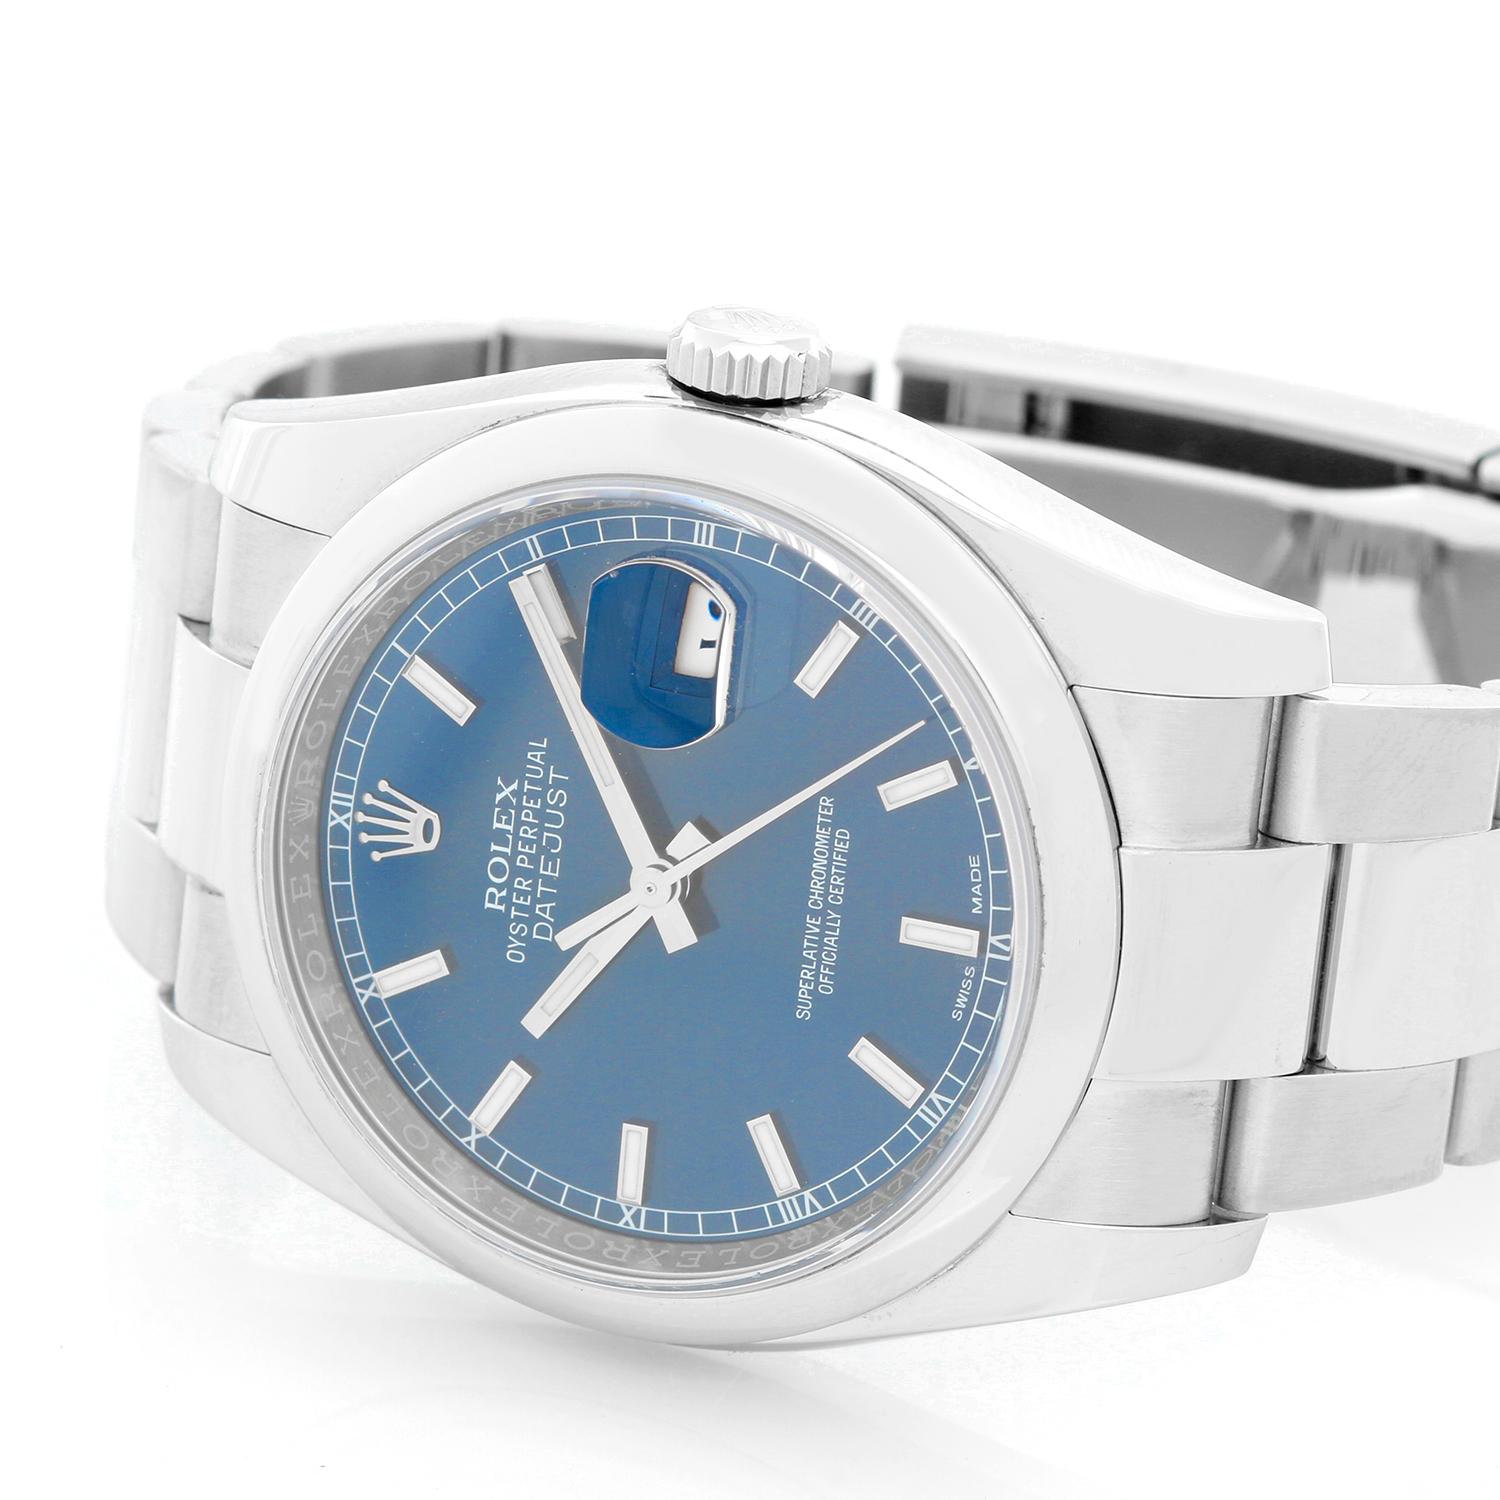 Rolex Datejust Men's Stainless Steel Automatic Winding Watch 116200 - Automatic winding, 31 jewels, Quickset, sapphire crystal. Stainless steel case with smooth bezel (36mm diameter). Blue stick hour marker dial; date at 3 o'clock . Stainless steel